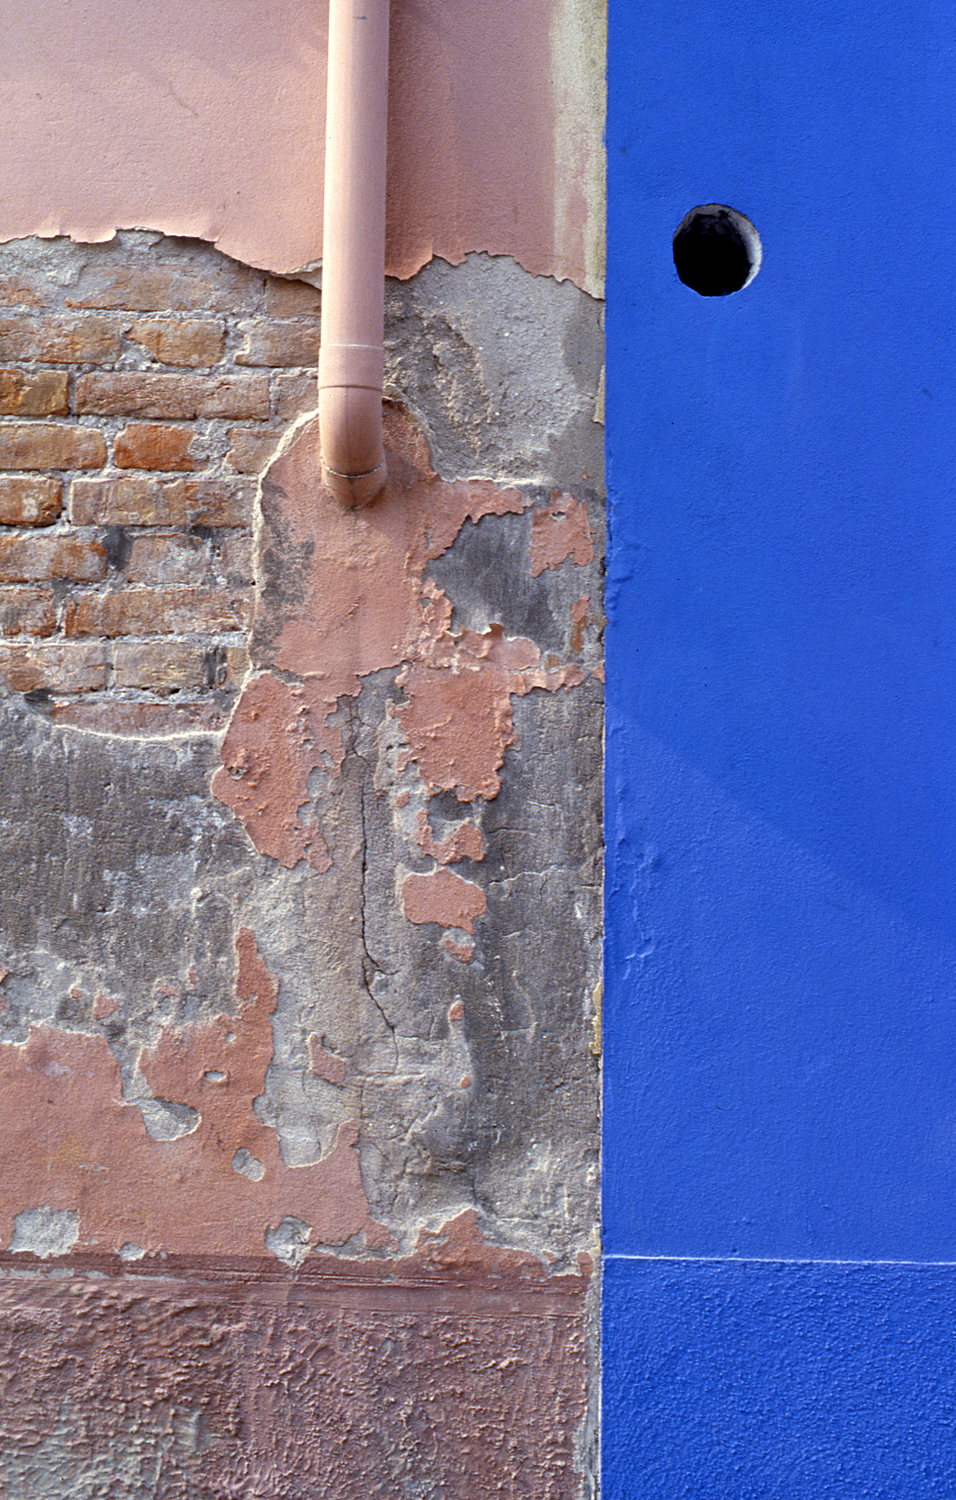   Pink and Blue Wall, Burano Italy, 1978 ,&nbsp;Cibachrome Print, 24 x 16cm, Edition of 10.&nbsp;&nbsp; &nbsp; &nbsp; &nbsp; &nbsp; &nbsp; &nbsp; &nbsp; &nbsp; &nbsp; &nbsp; &nbsp; &nbsp;  Exhibition:  Burano Colour Works ,&nbsp;Australian Centre for